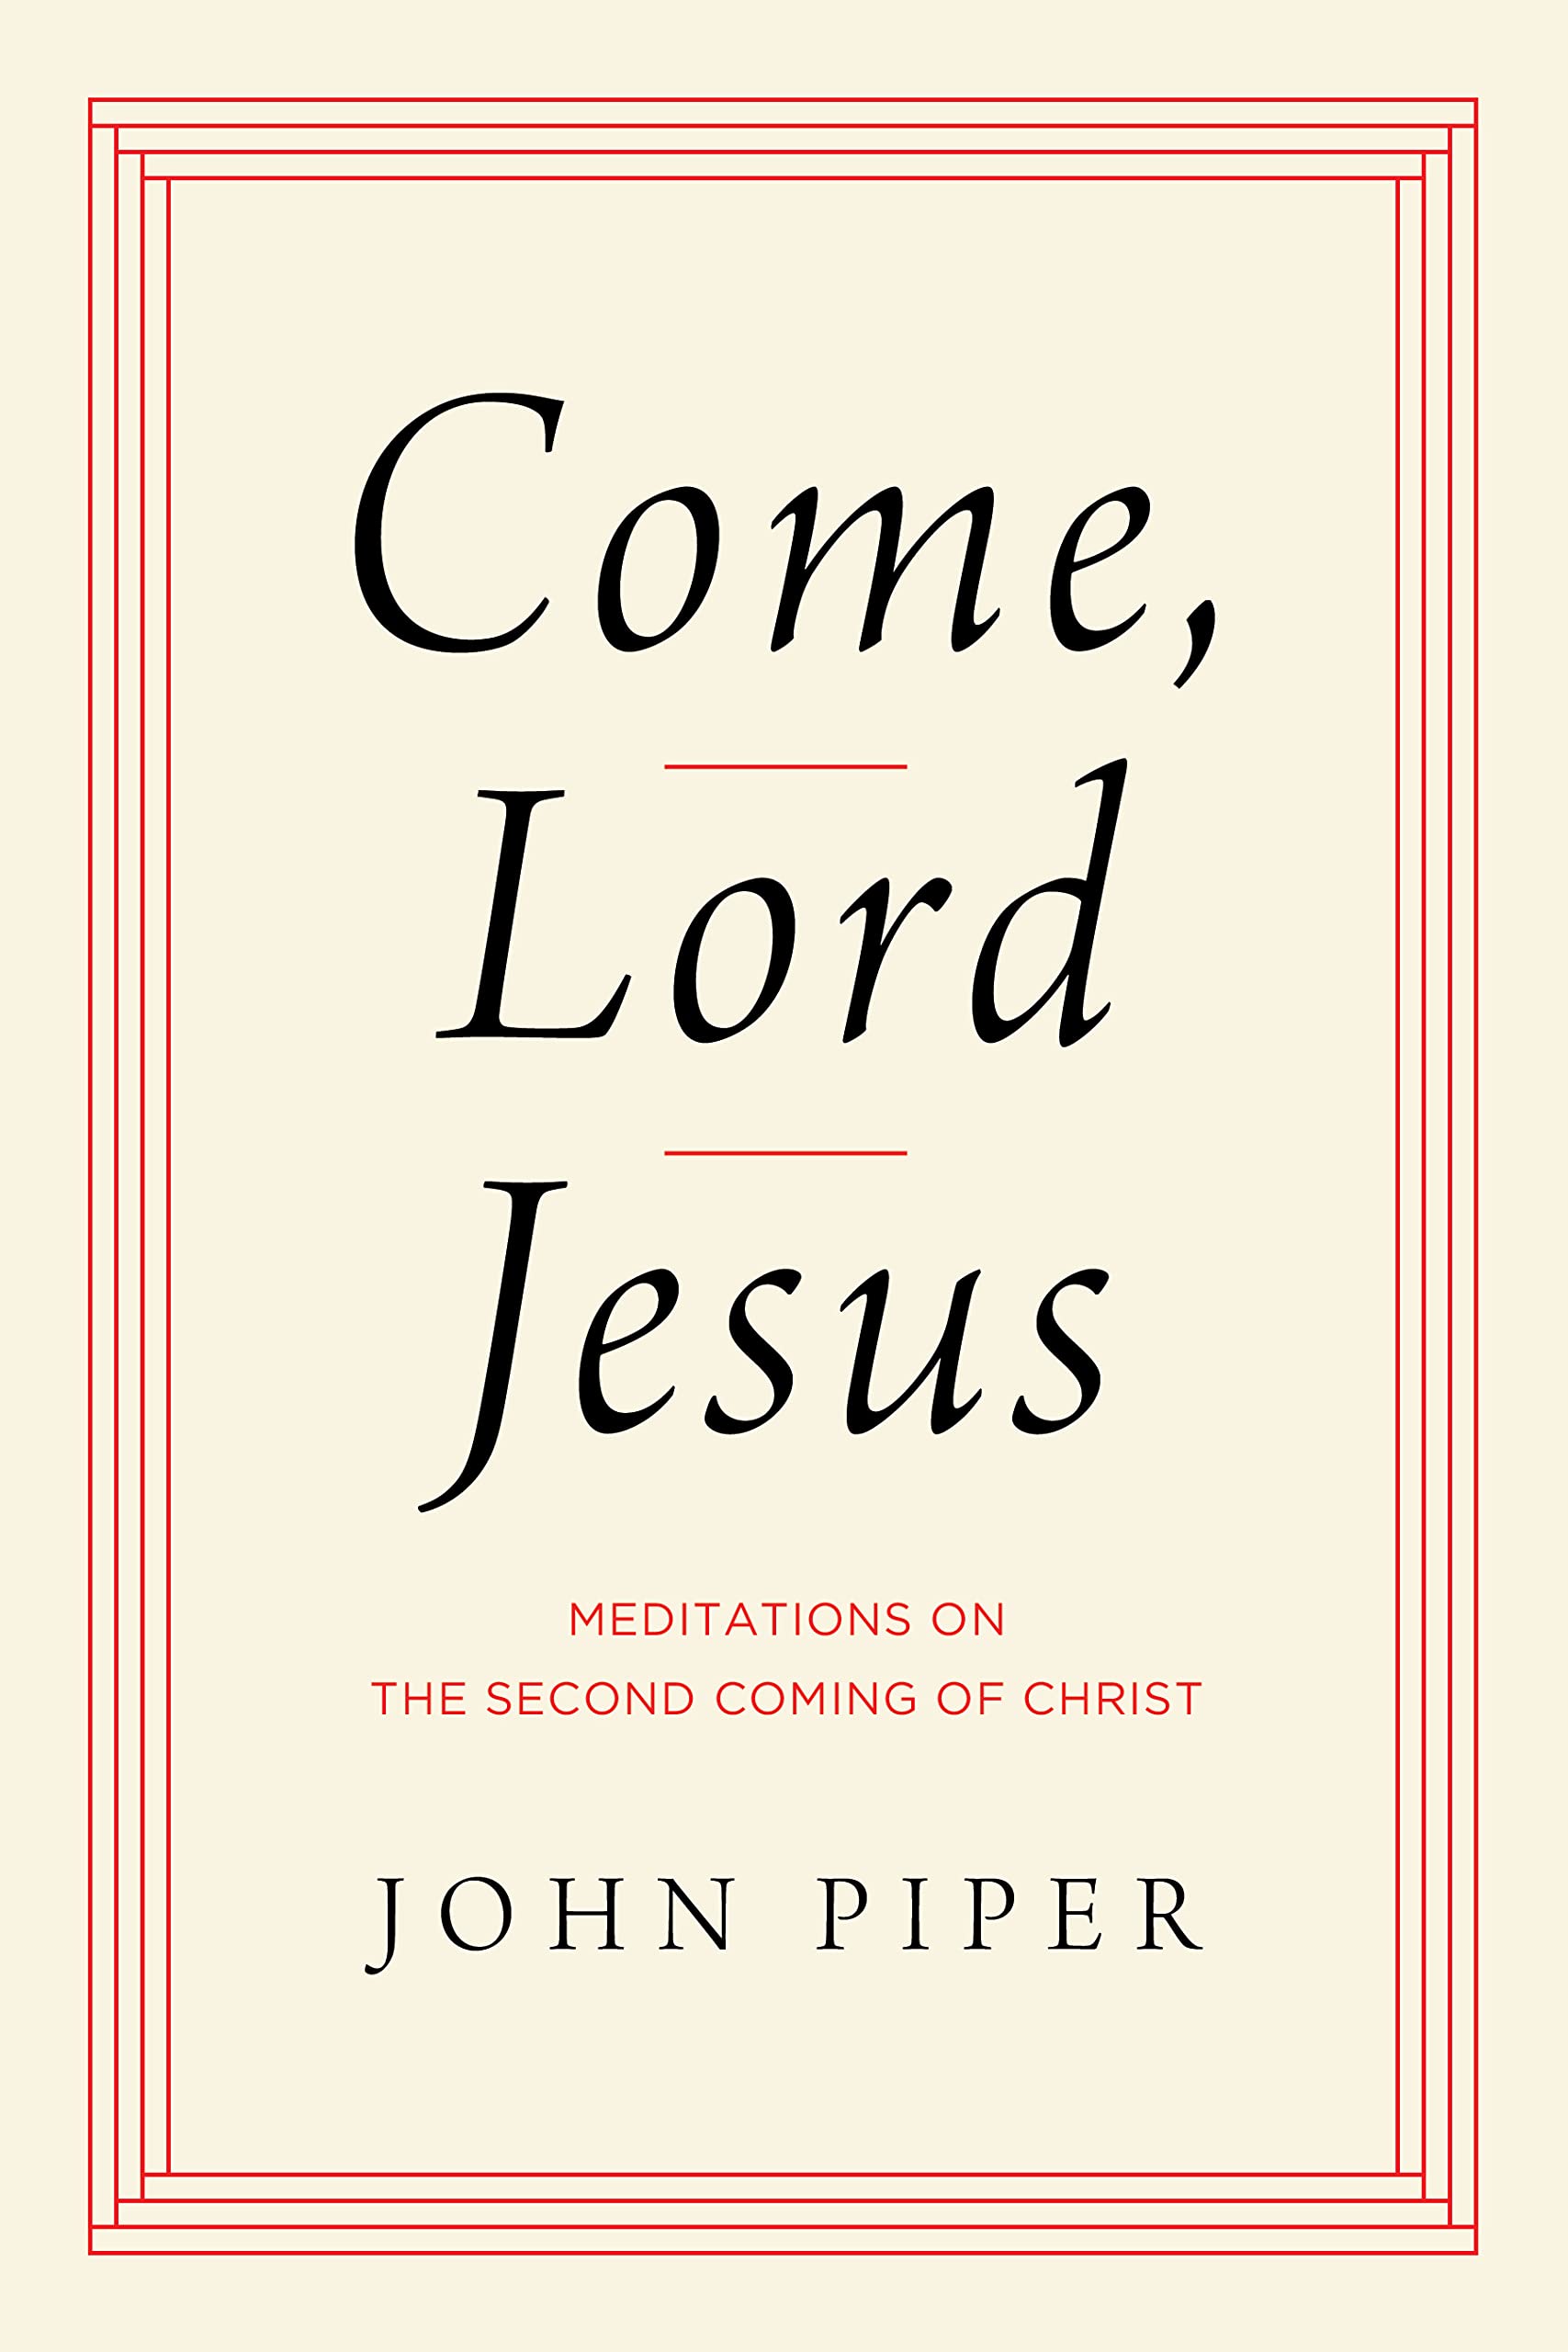 Book Notice: COME, LORD JESUS: MEDITATIONS ON THE SECOND COMING OF CHRIST, by John Piper